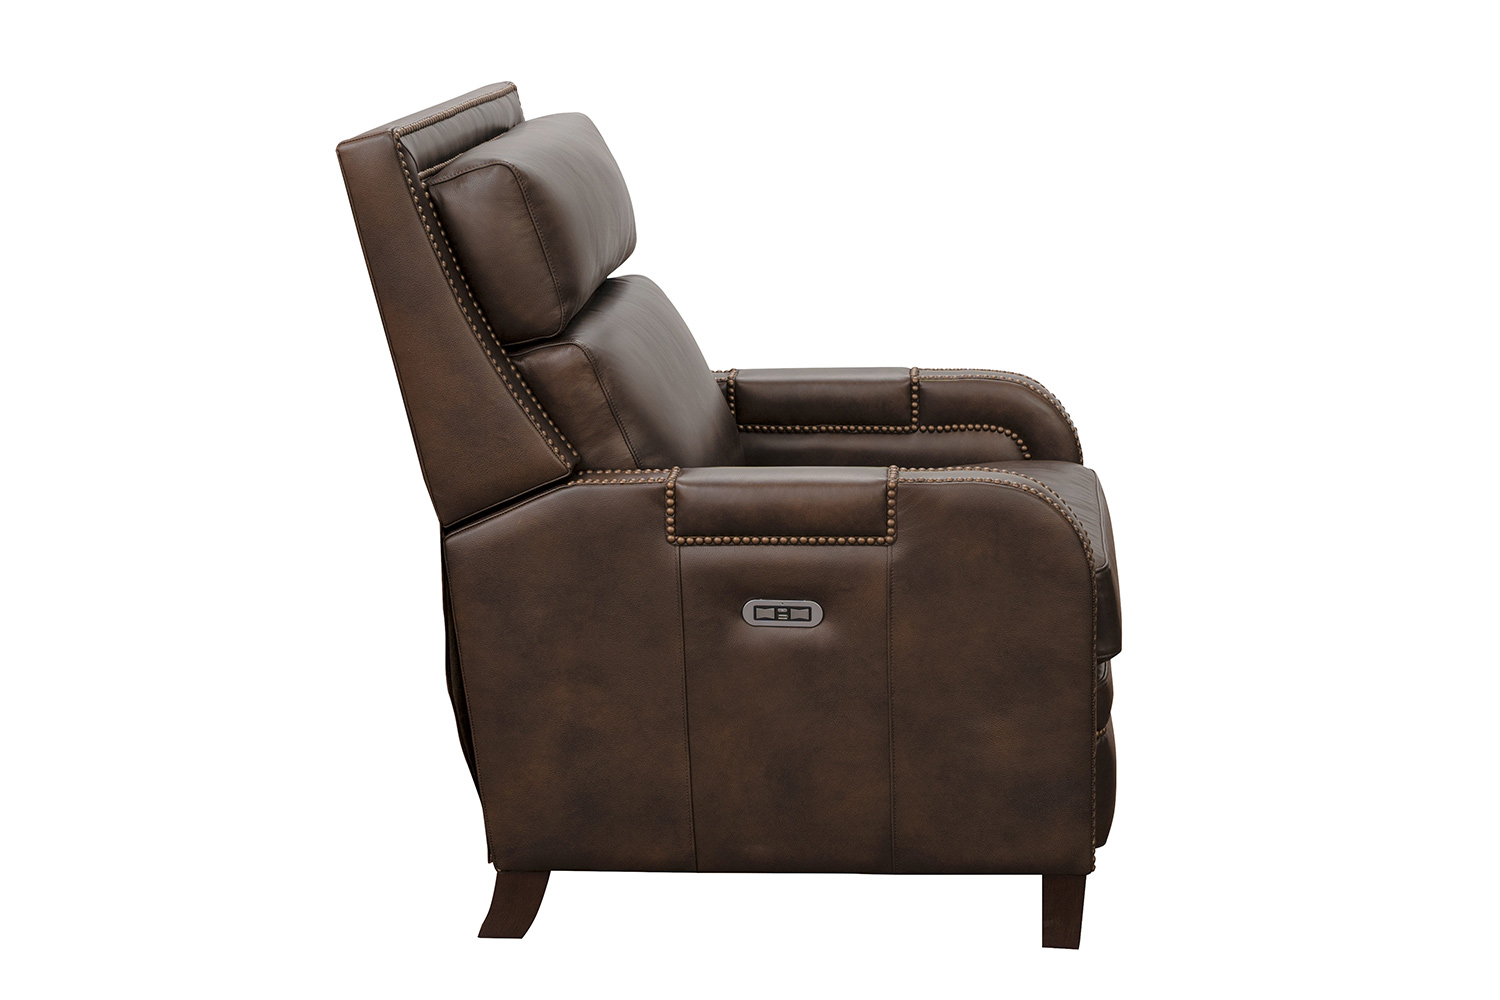 Barcalounger Cambridge Voice Activated Power Recliner Chair with Power Head Rest - Ashford Walnut/All Leather